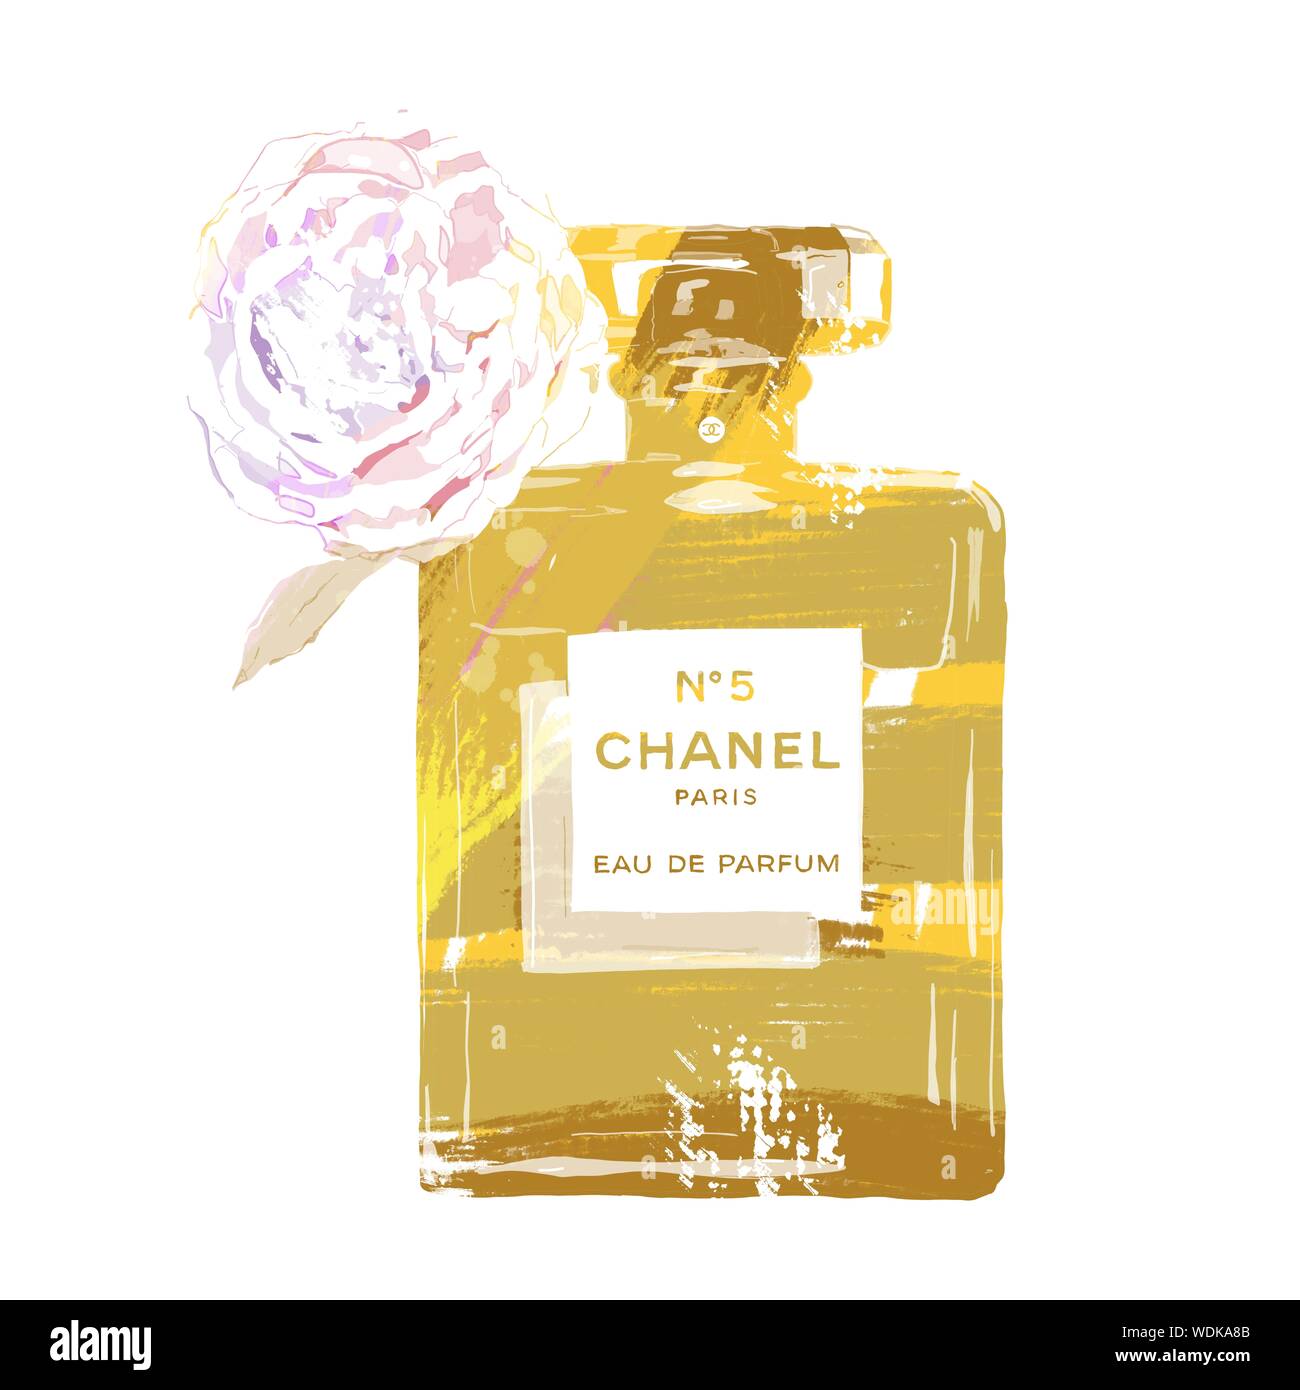 Chanel no 5 bottle Cut Out Stock Images & Pictures - Alamy